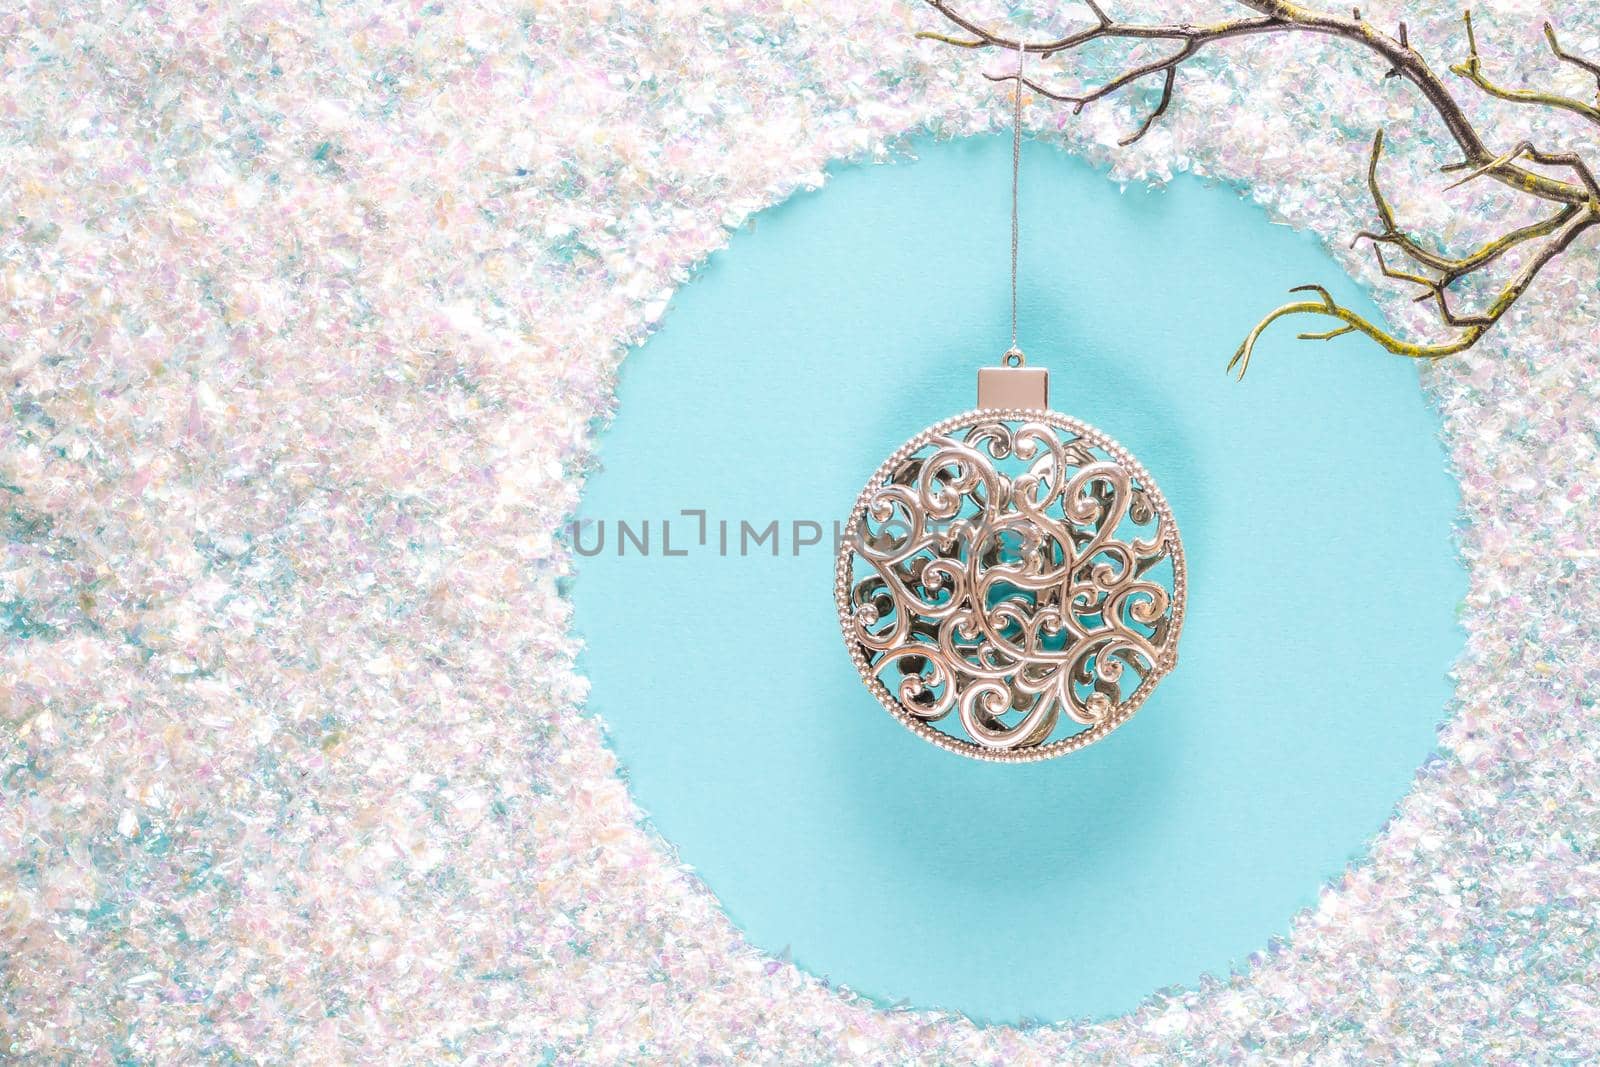 Modern Christmas holiday ornament decorations in contemporary trendy blue and white colors with sparkling glitter on blue background.